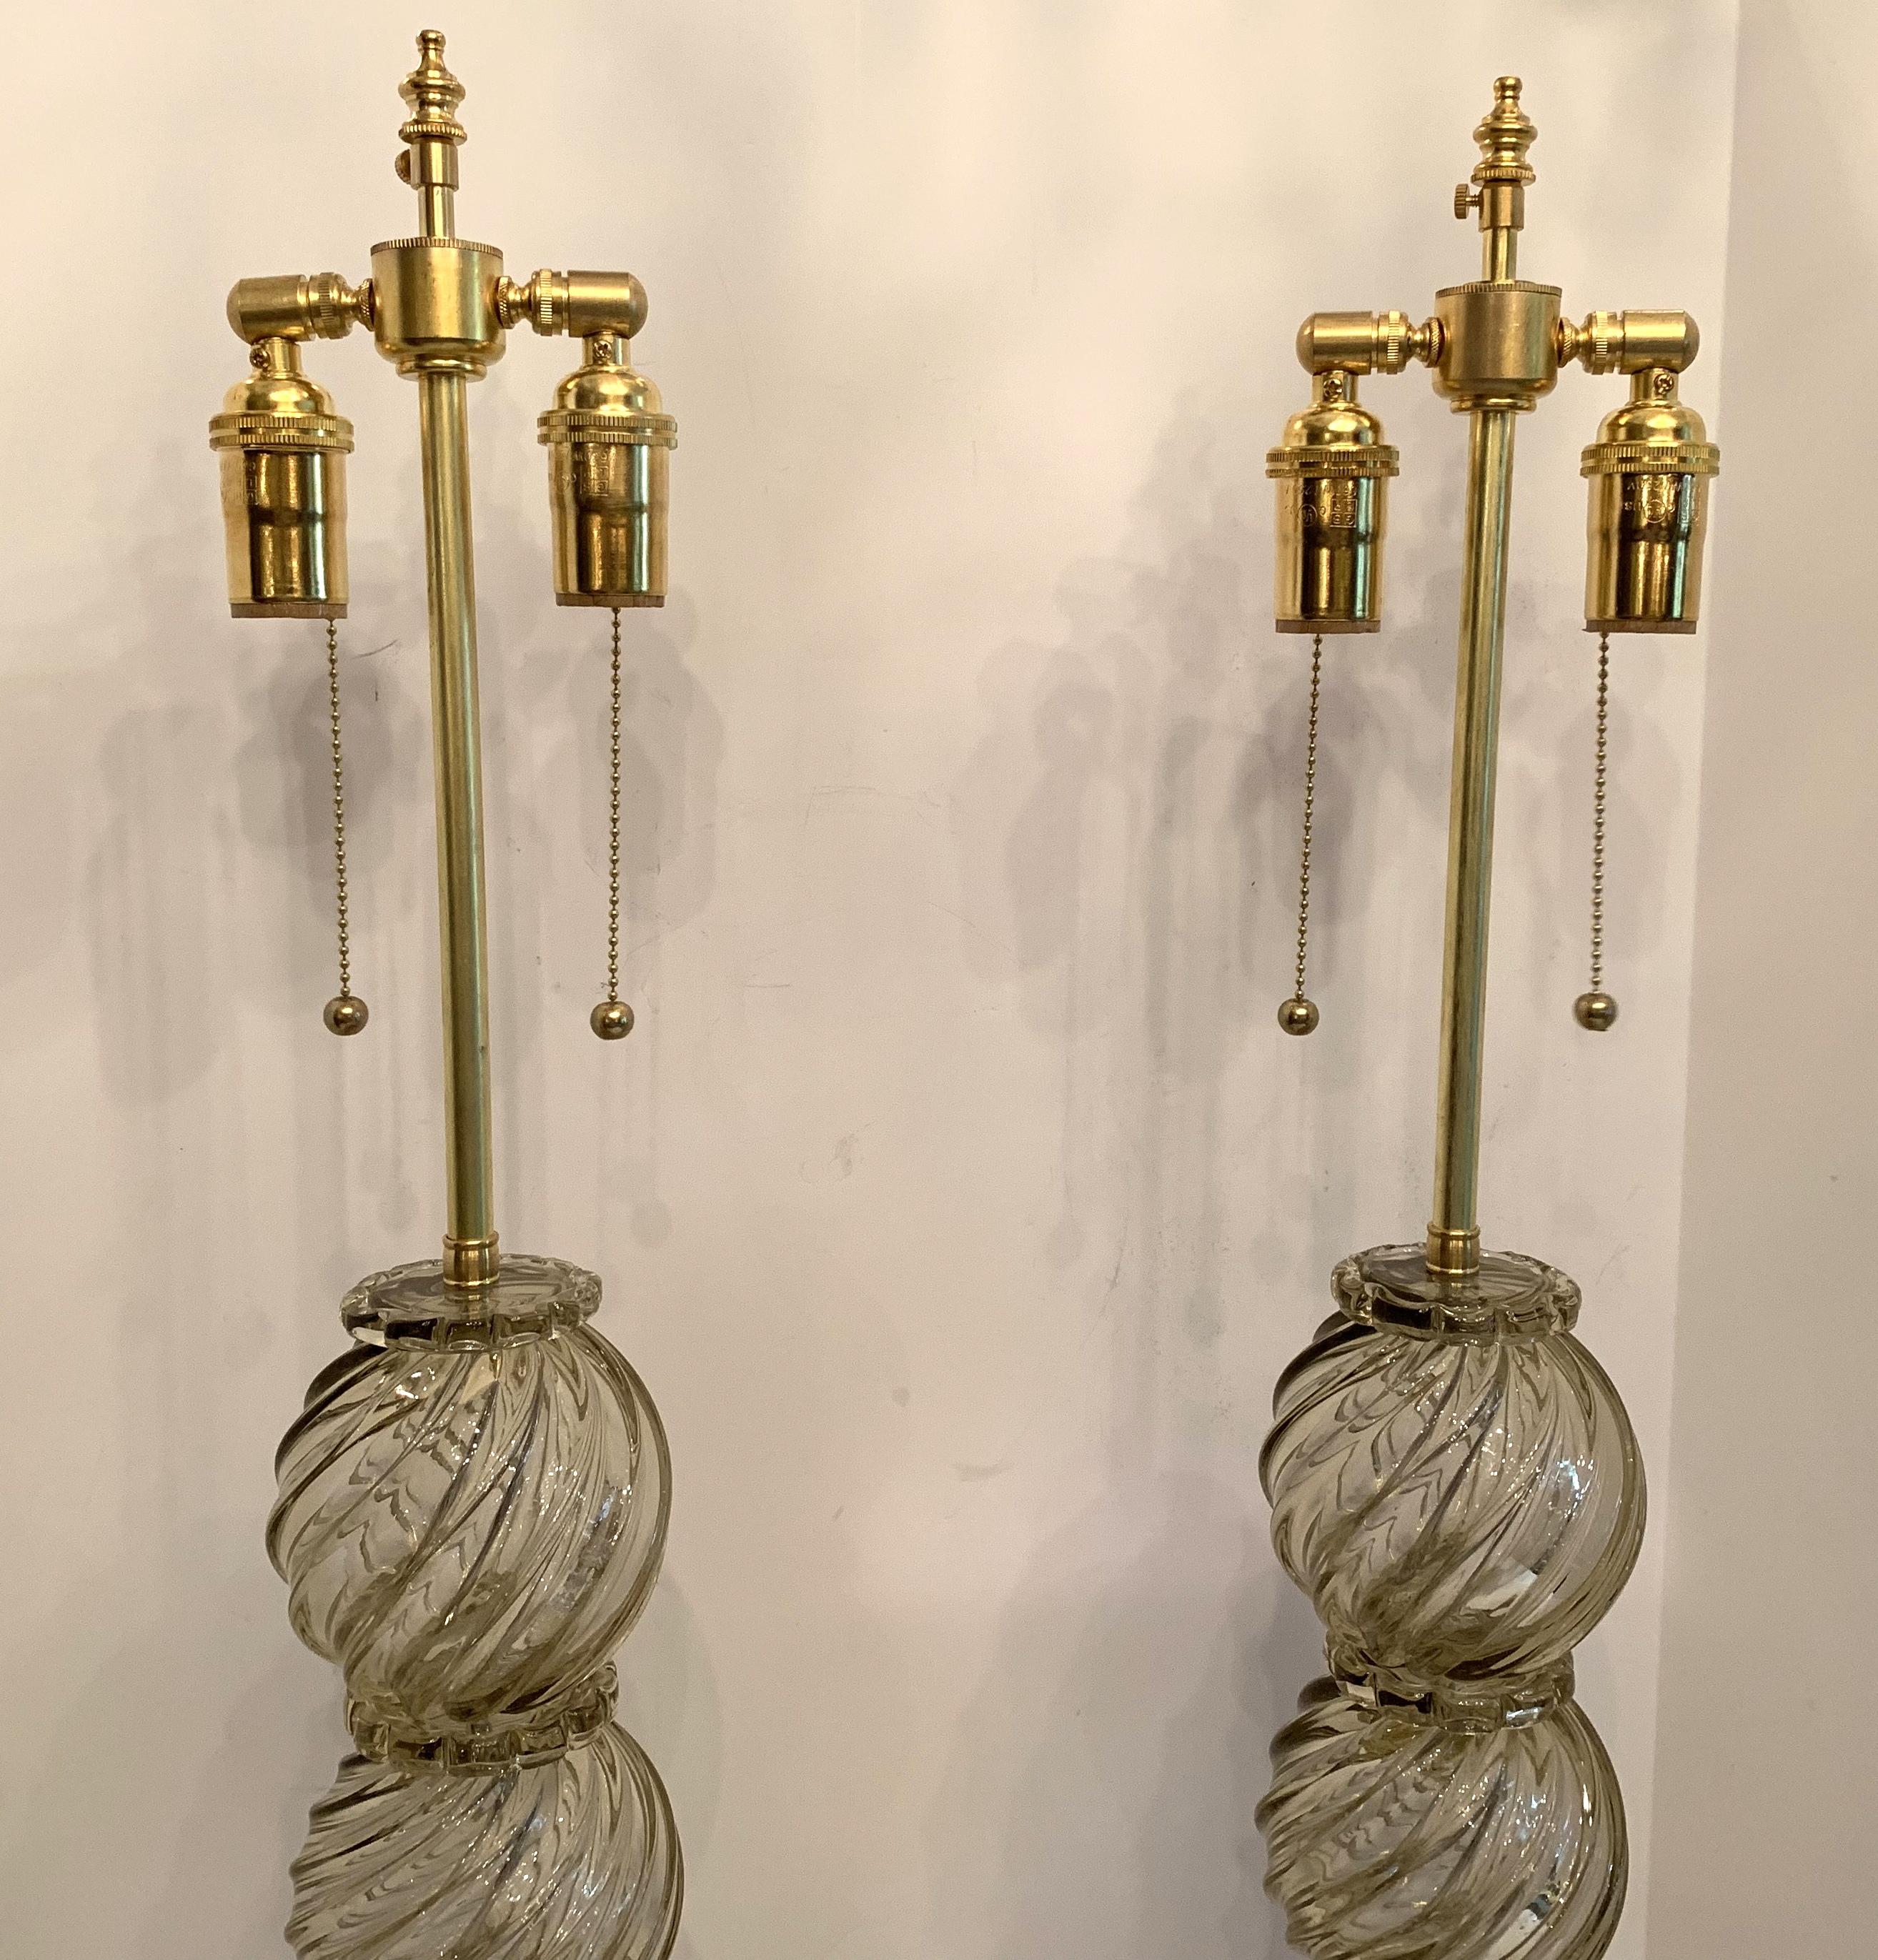 A Wonderful pair of Mid-Century Modern Italian / Murano Venetian swirl form pale gold / yellow color art glass lamps in the Art Deco style with new brass fittings and wiring.